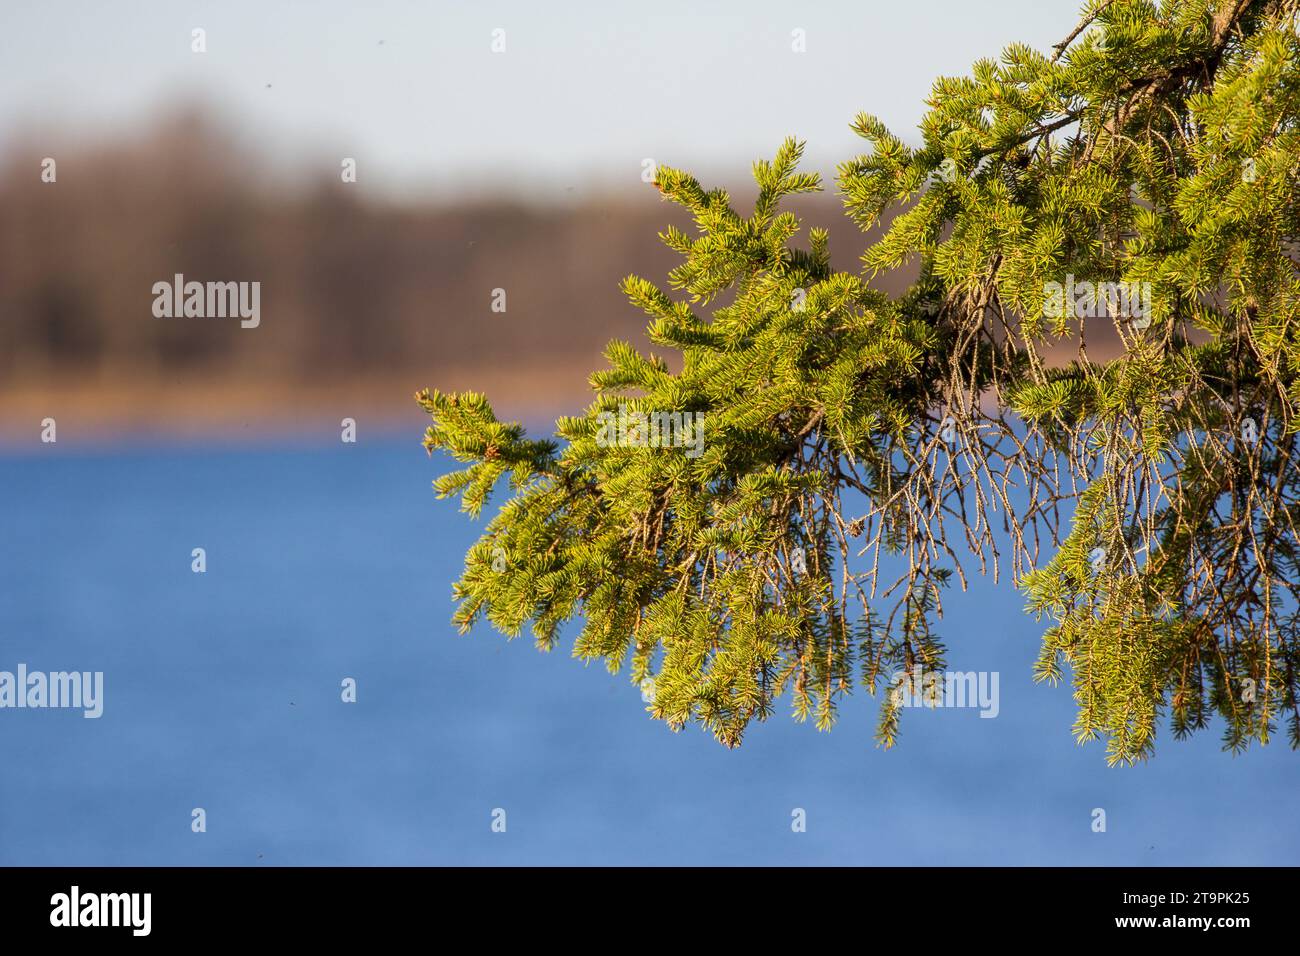 Balsam Fir (Abies balsamea) boughs with blurry background of lake and shoreline in the Chippewa National Forest, northern Minnesota USA Stock Photo